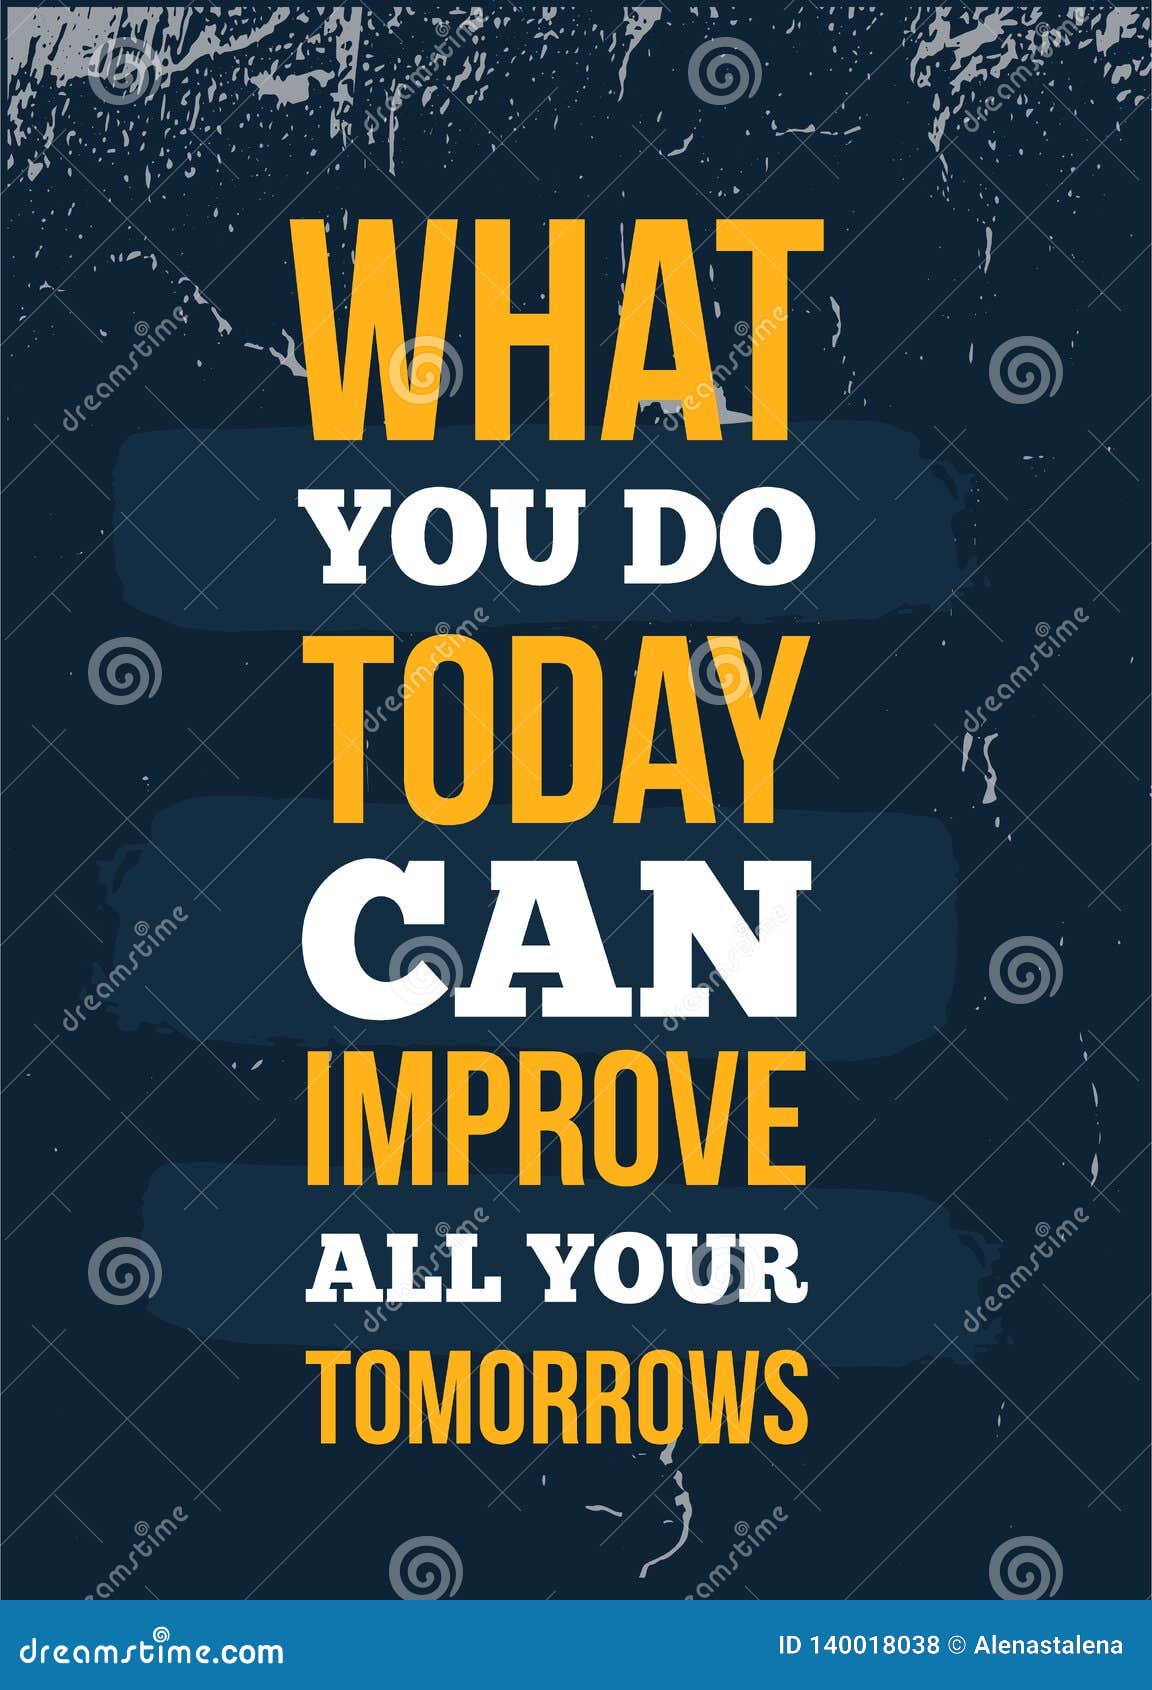 Tomorrow Poster Great Design For Any Purposes Vector Quote Inspiration For Future Stock Vector Illustration Of Quotation Abstract